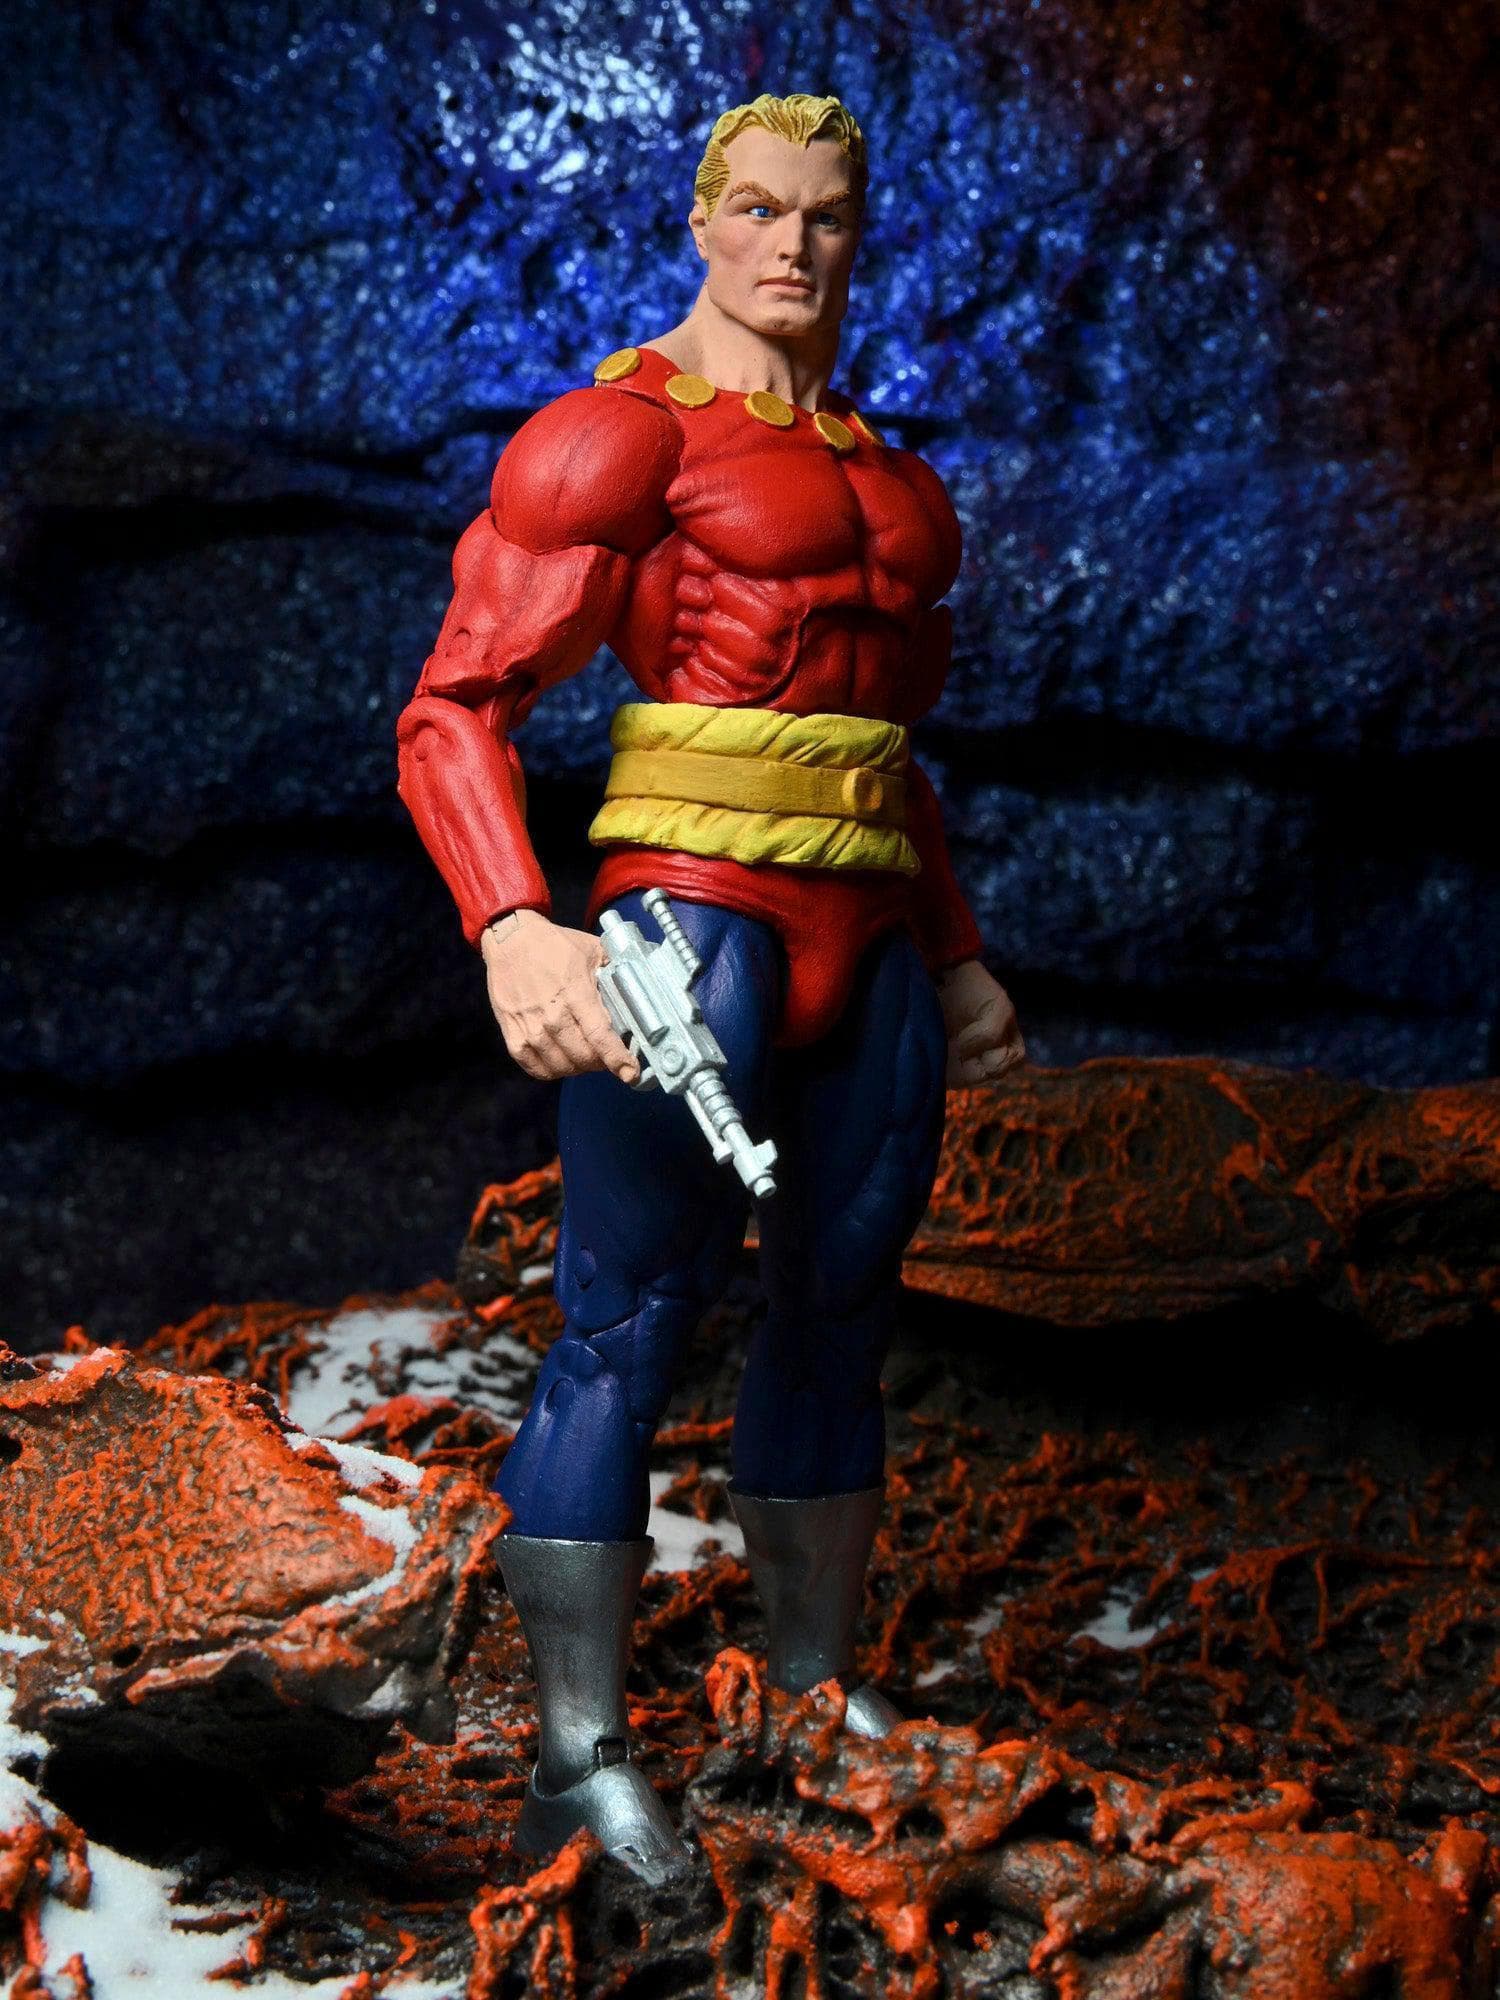 NECA - King Features - 7" Scale Action Figure - Flash Gordon (Classic Toy Appearance) - costumes.com